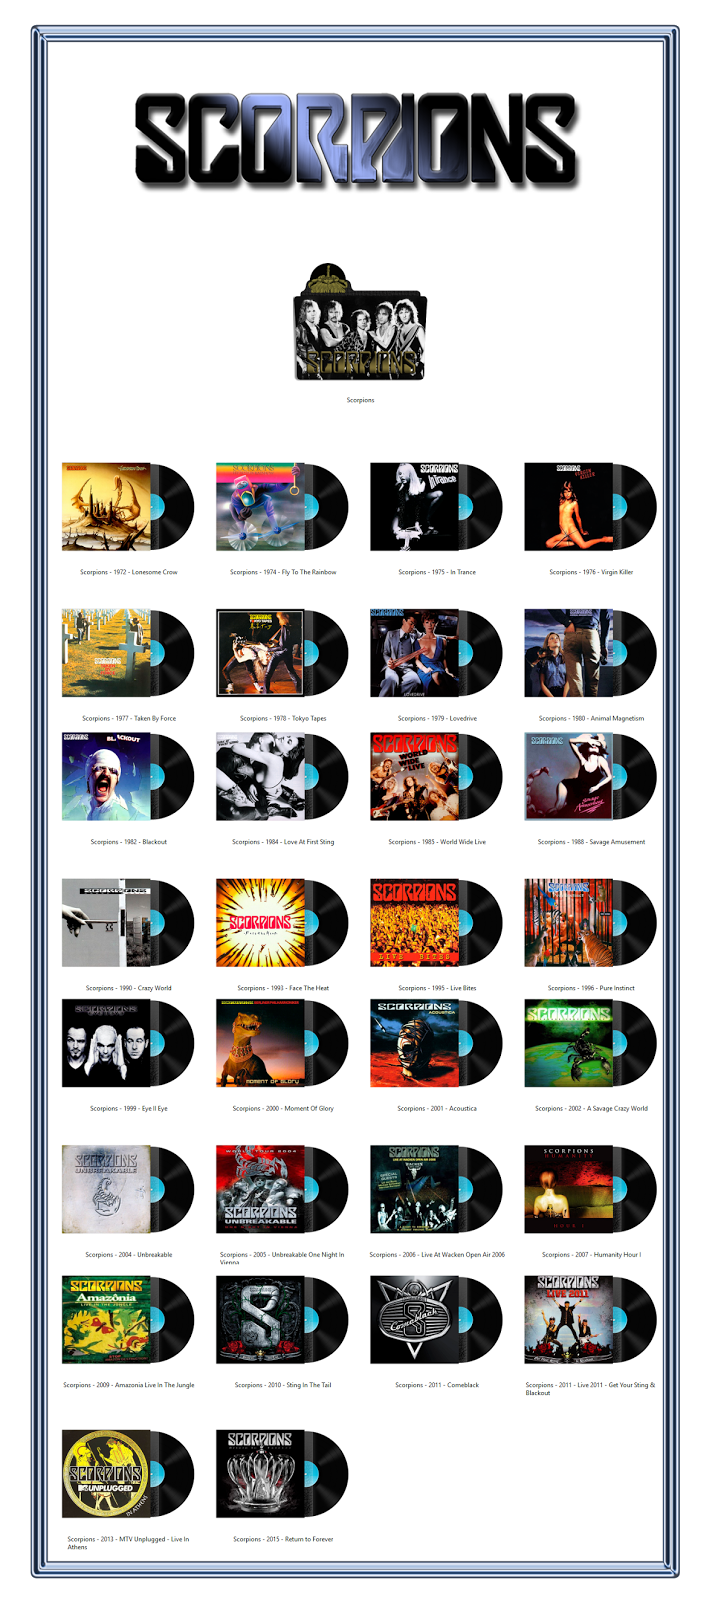 Scorpions Discography Icons ICO PNG by AlbumArtIcons on DeviantArt